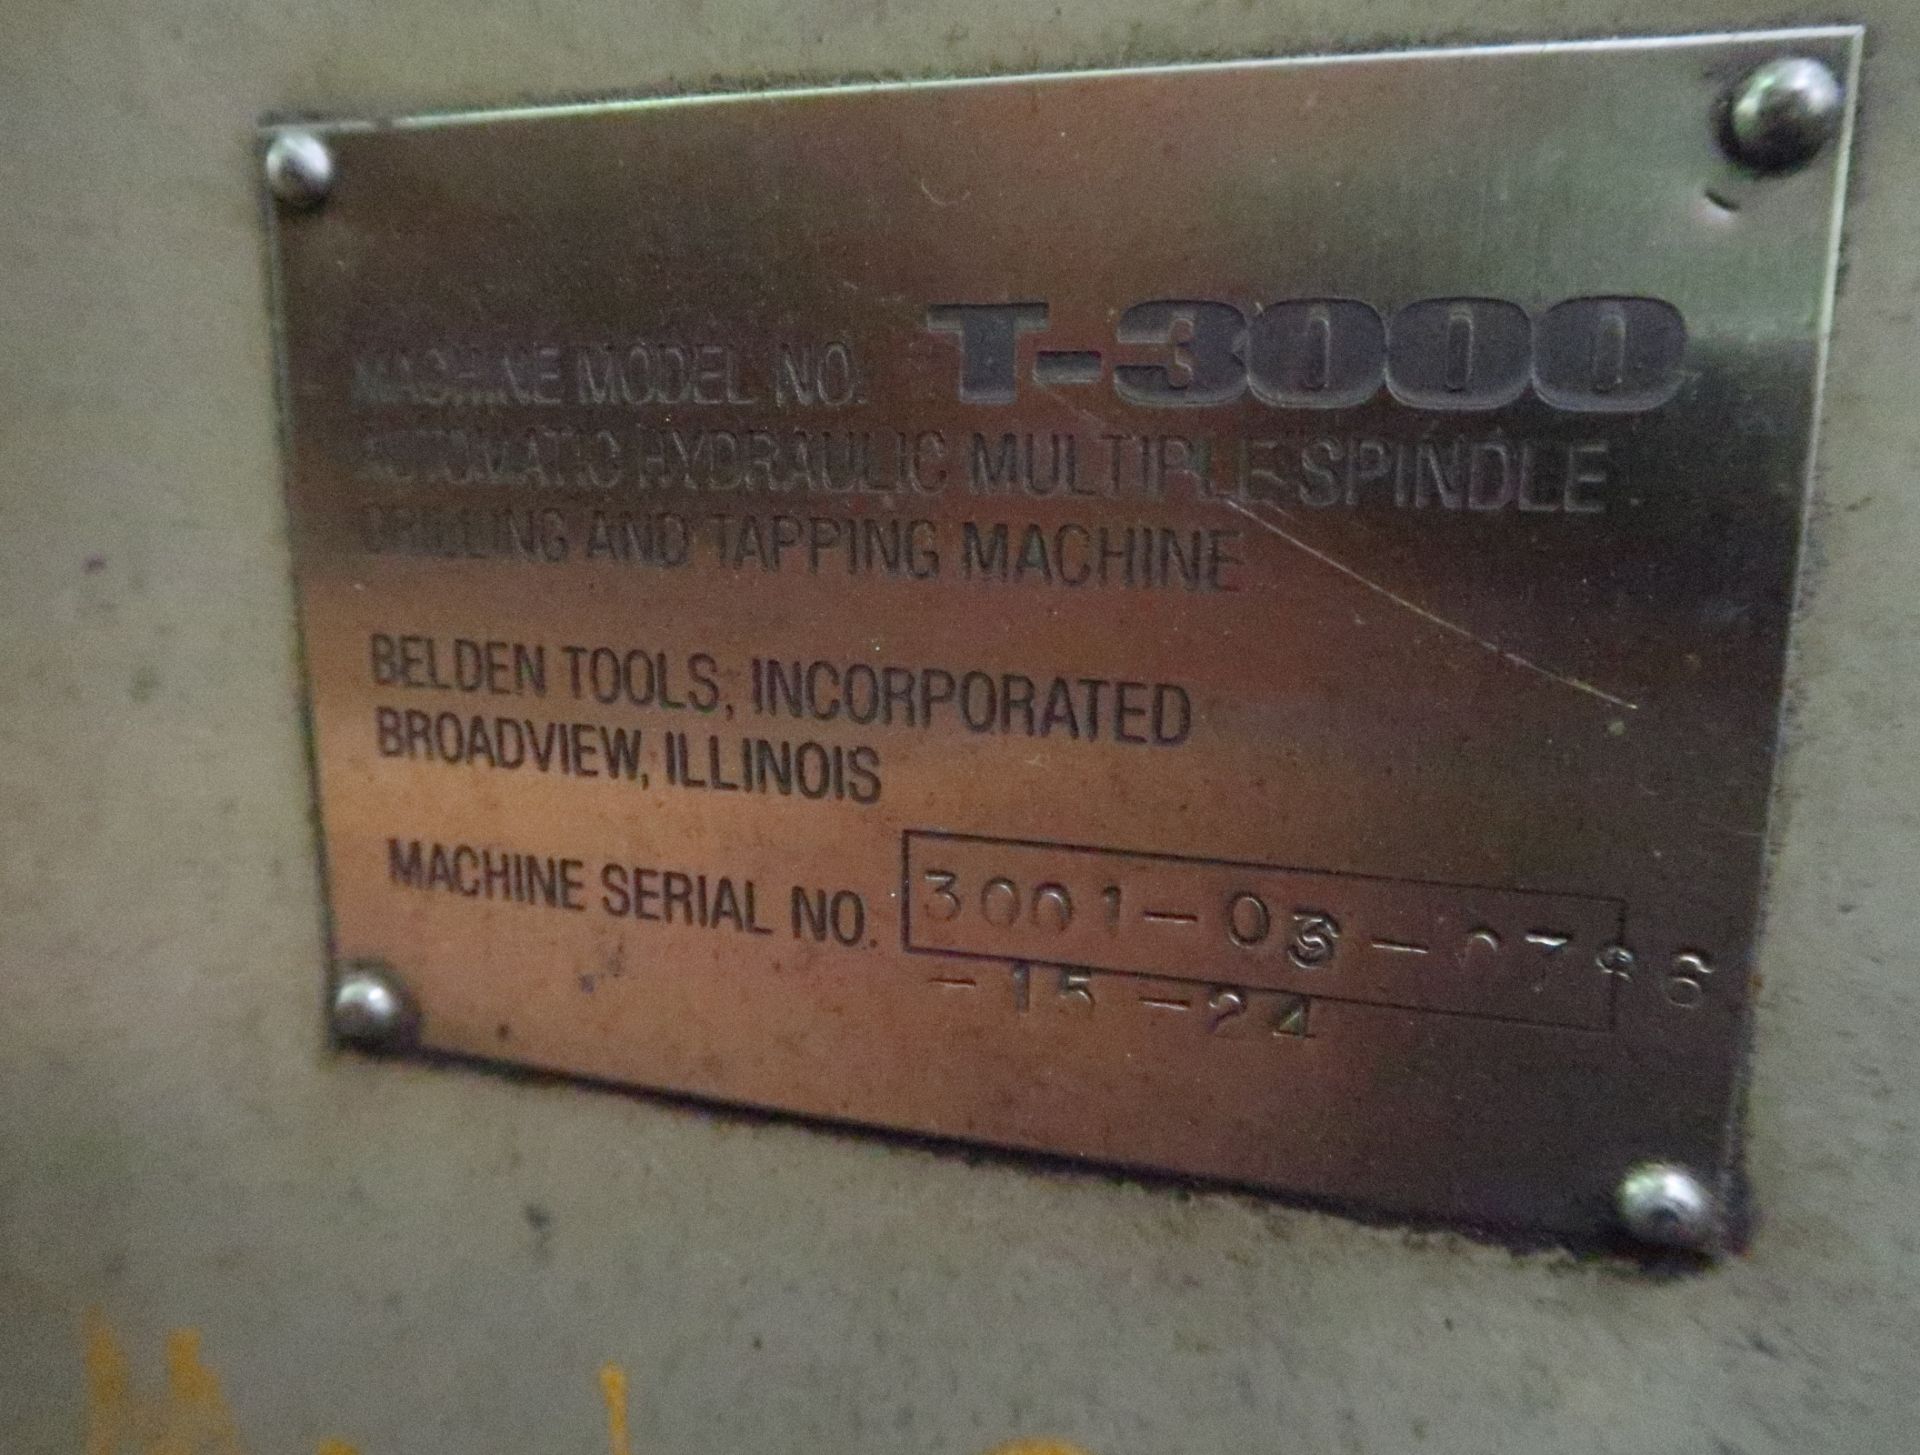 BELDEN T-3000 AUTOMATIC HYDRAULIC MULTIPLE SPINDLE DRILLING & TAPPING MACHINE, SN. 3001-03-0786-15- - Image 5 of 5